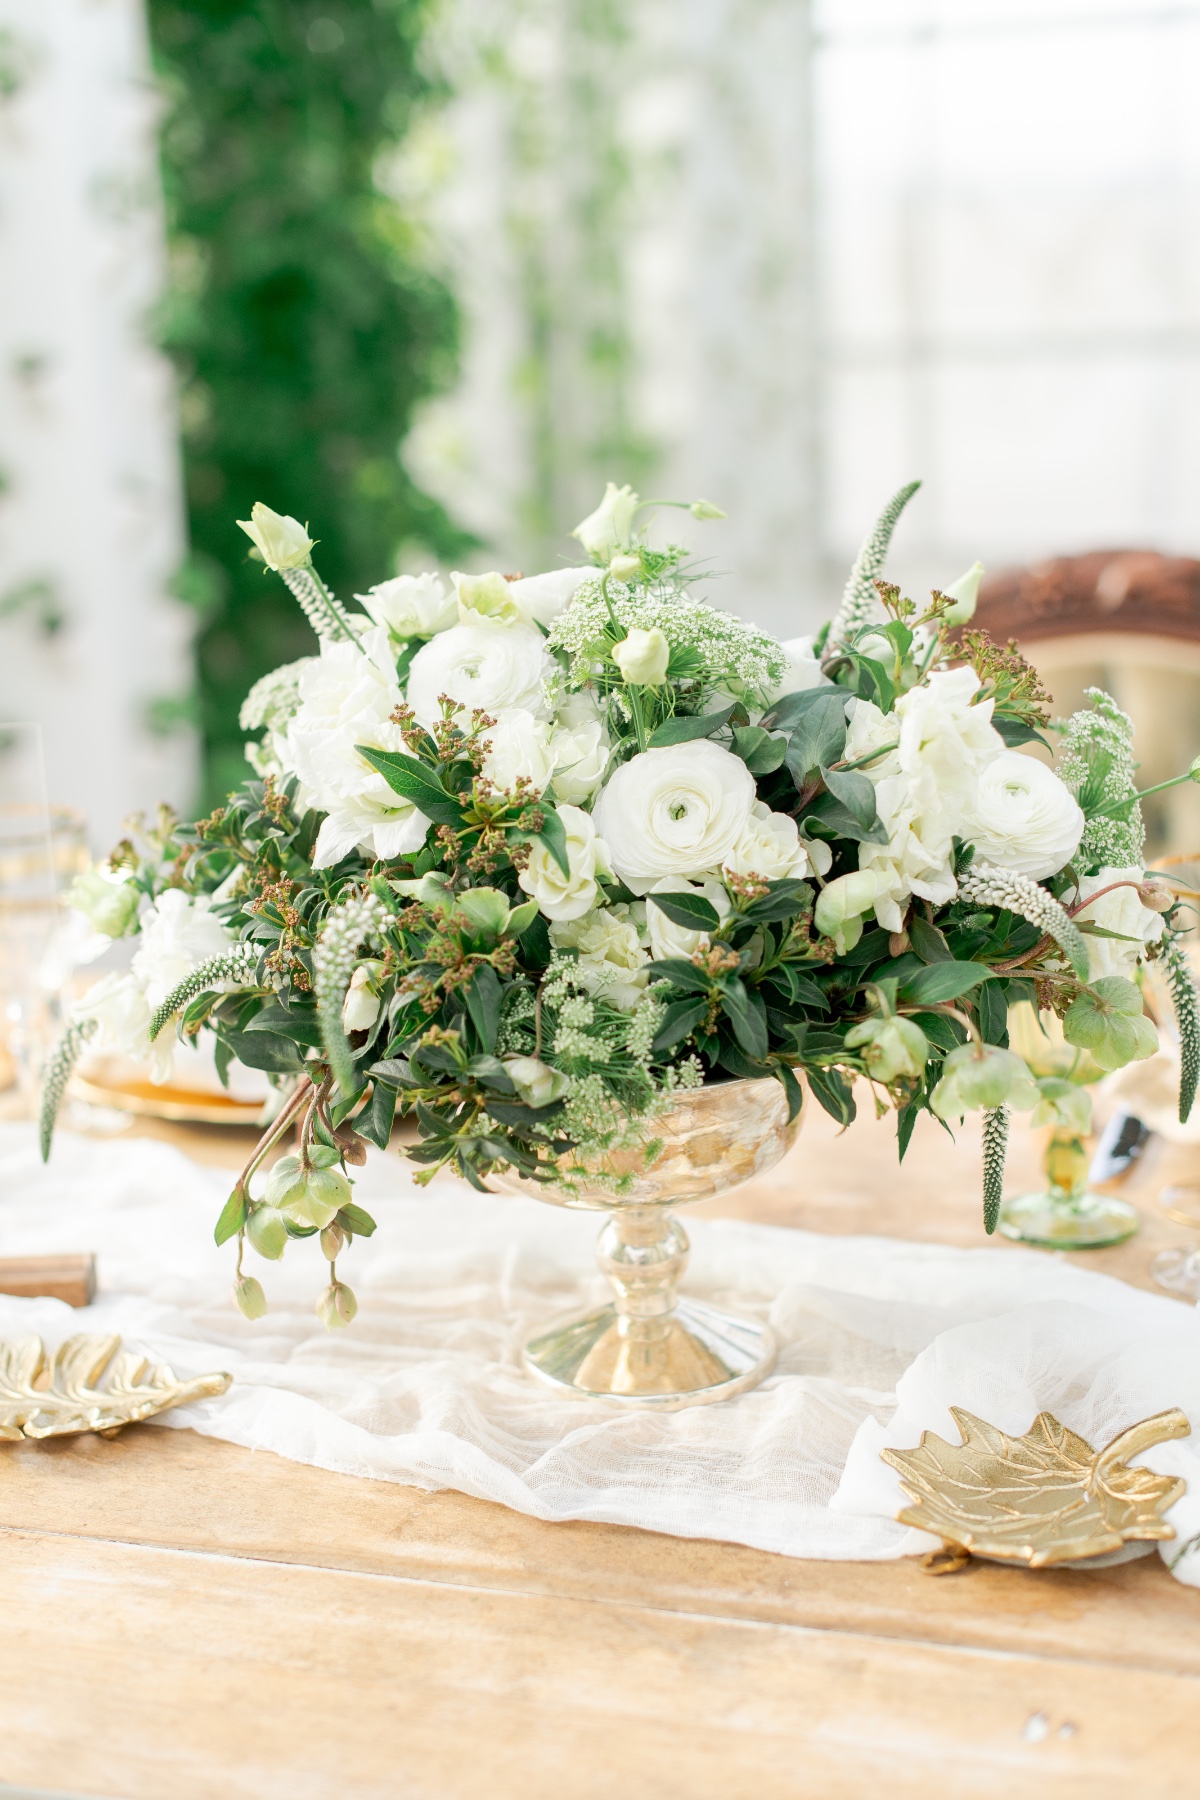 Green and white floral arrangement